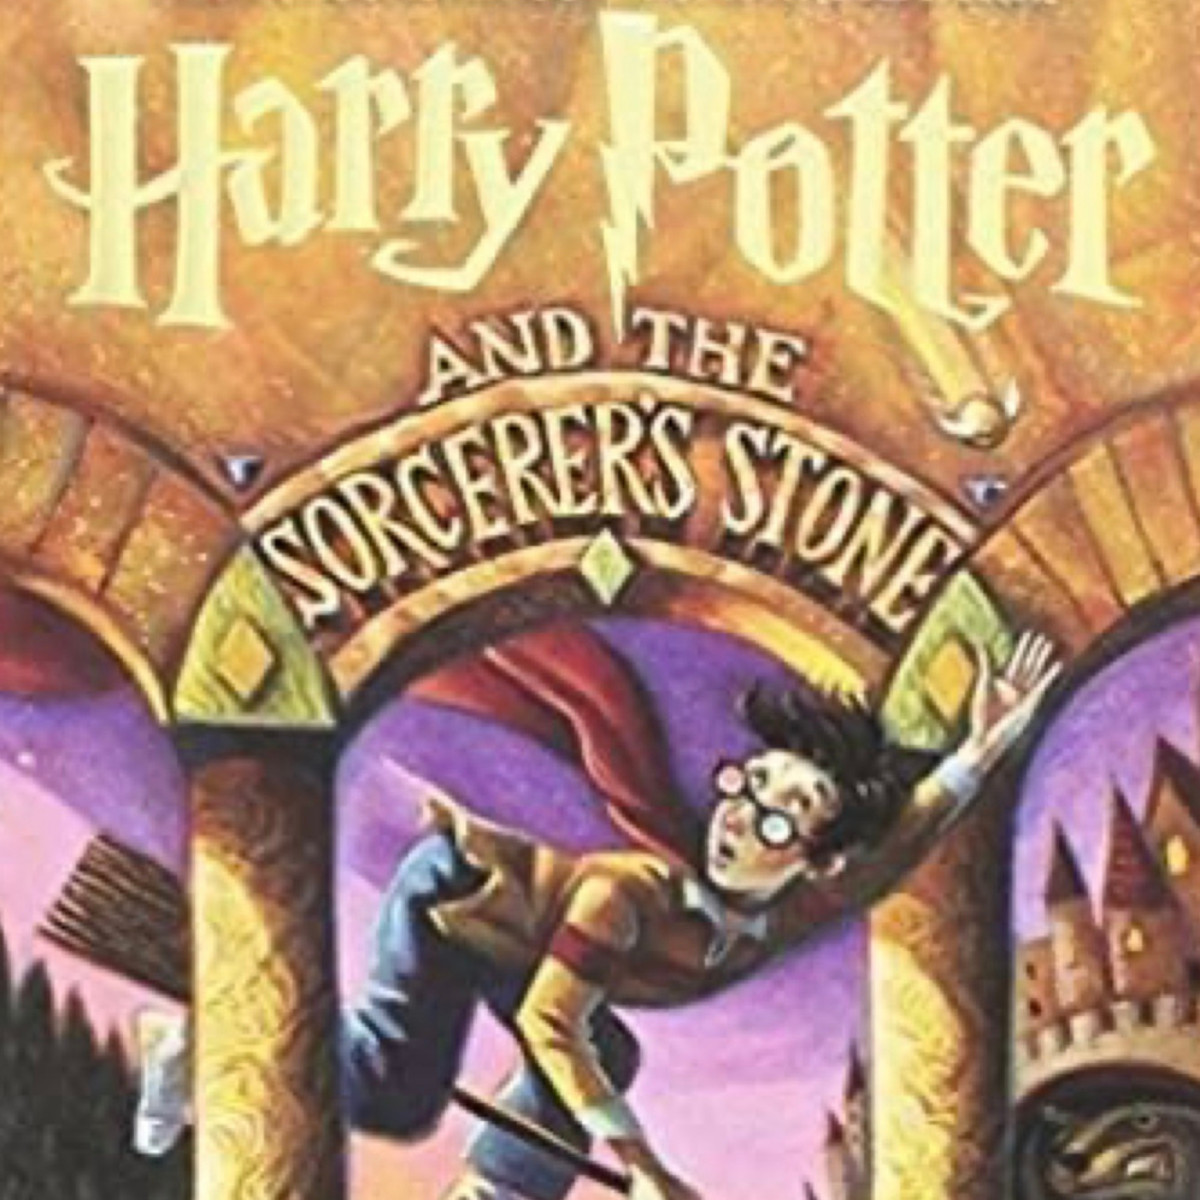 Are the Harry Potter books available in audiobook lending libraries? 2